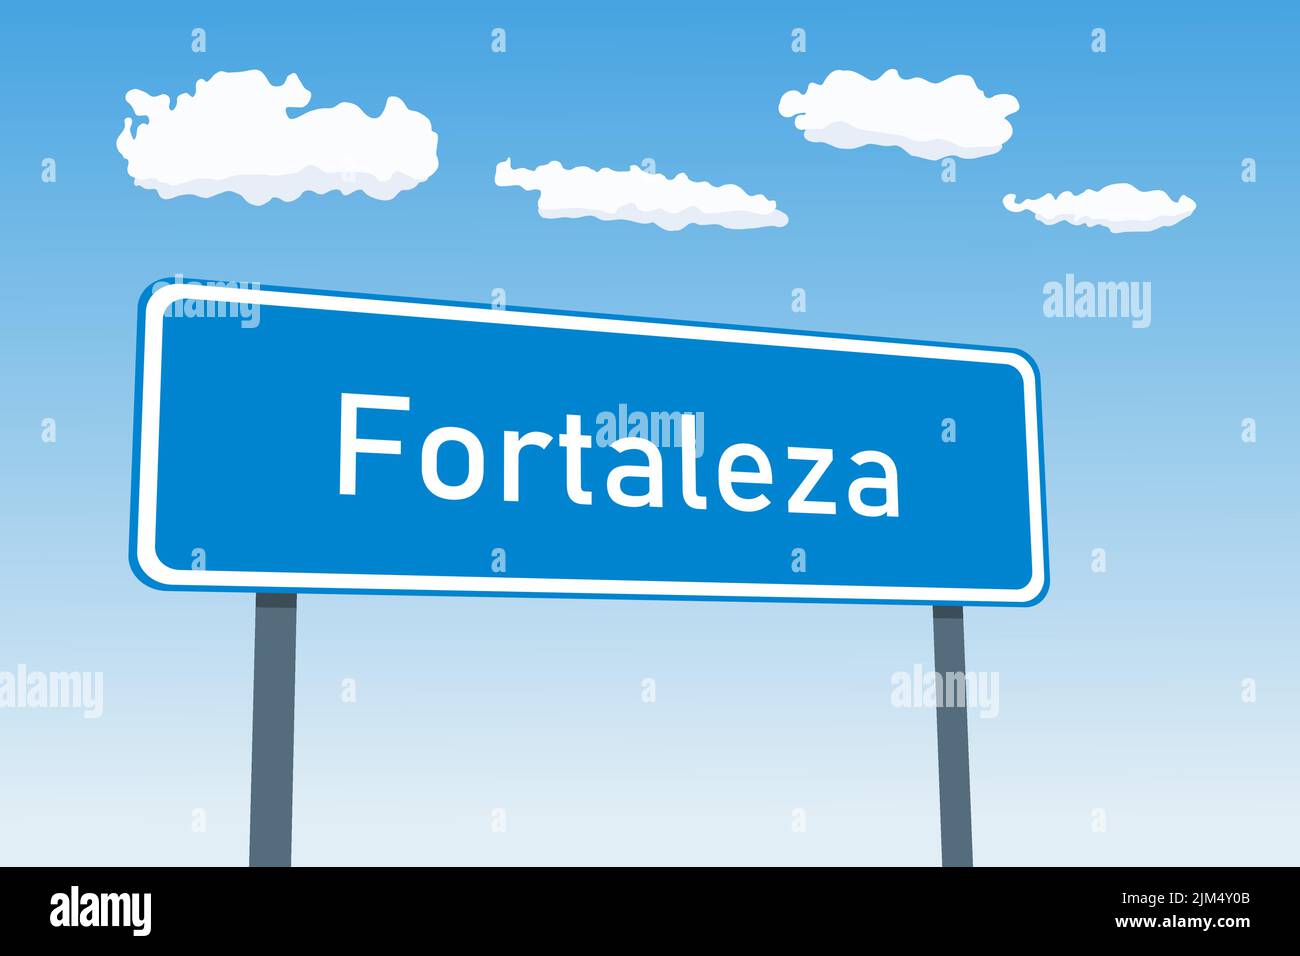 Fortaleza city sign in Brazil. City limit welcome road sign. Stock Vector